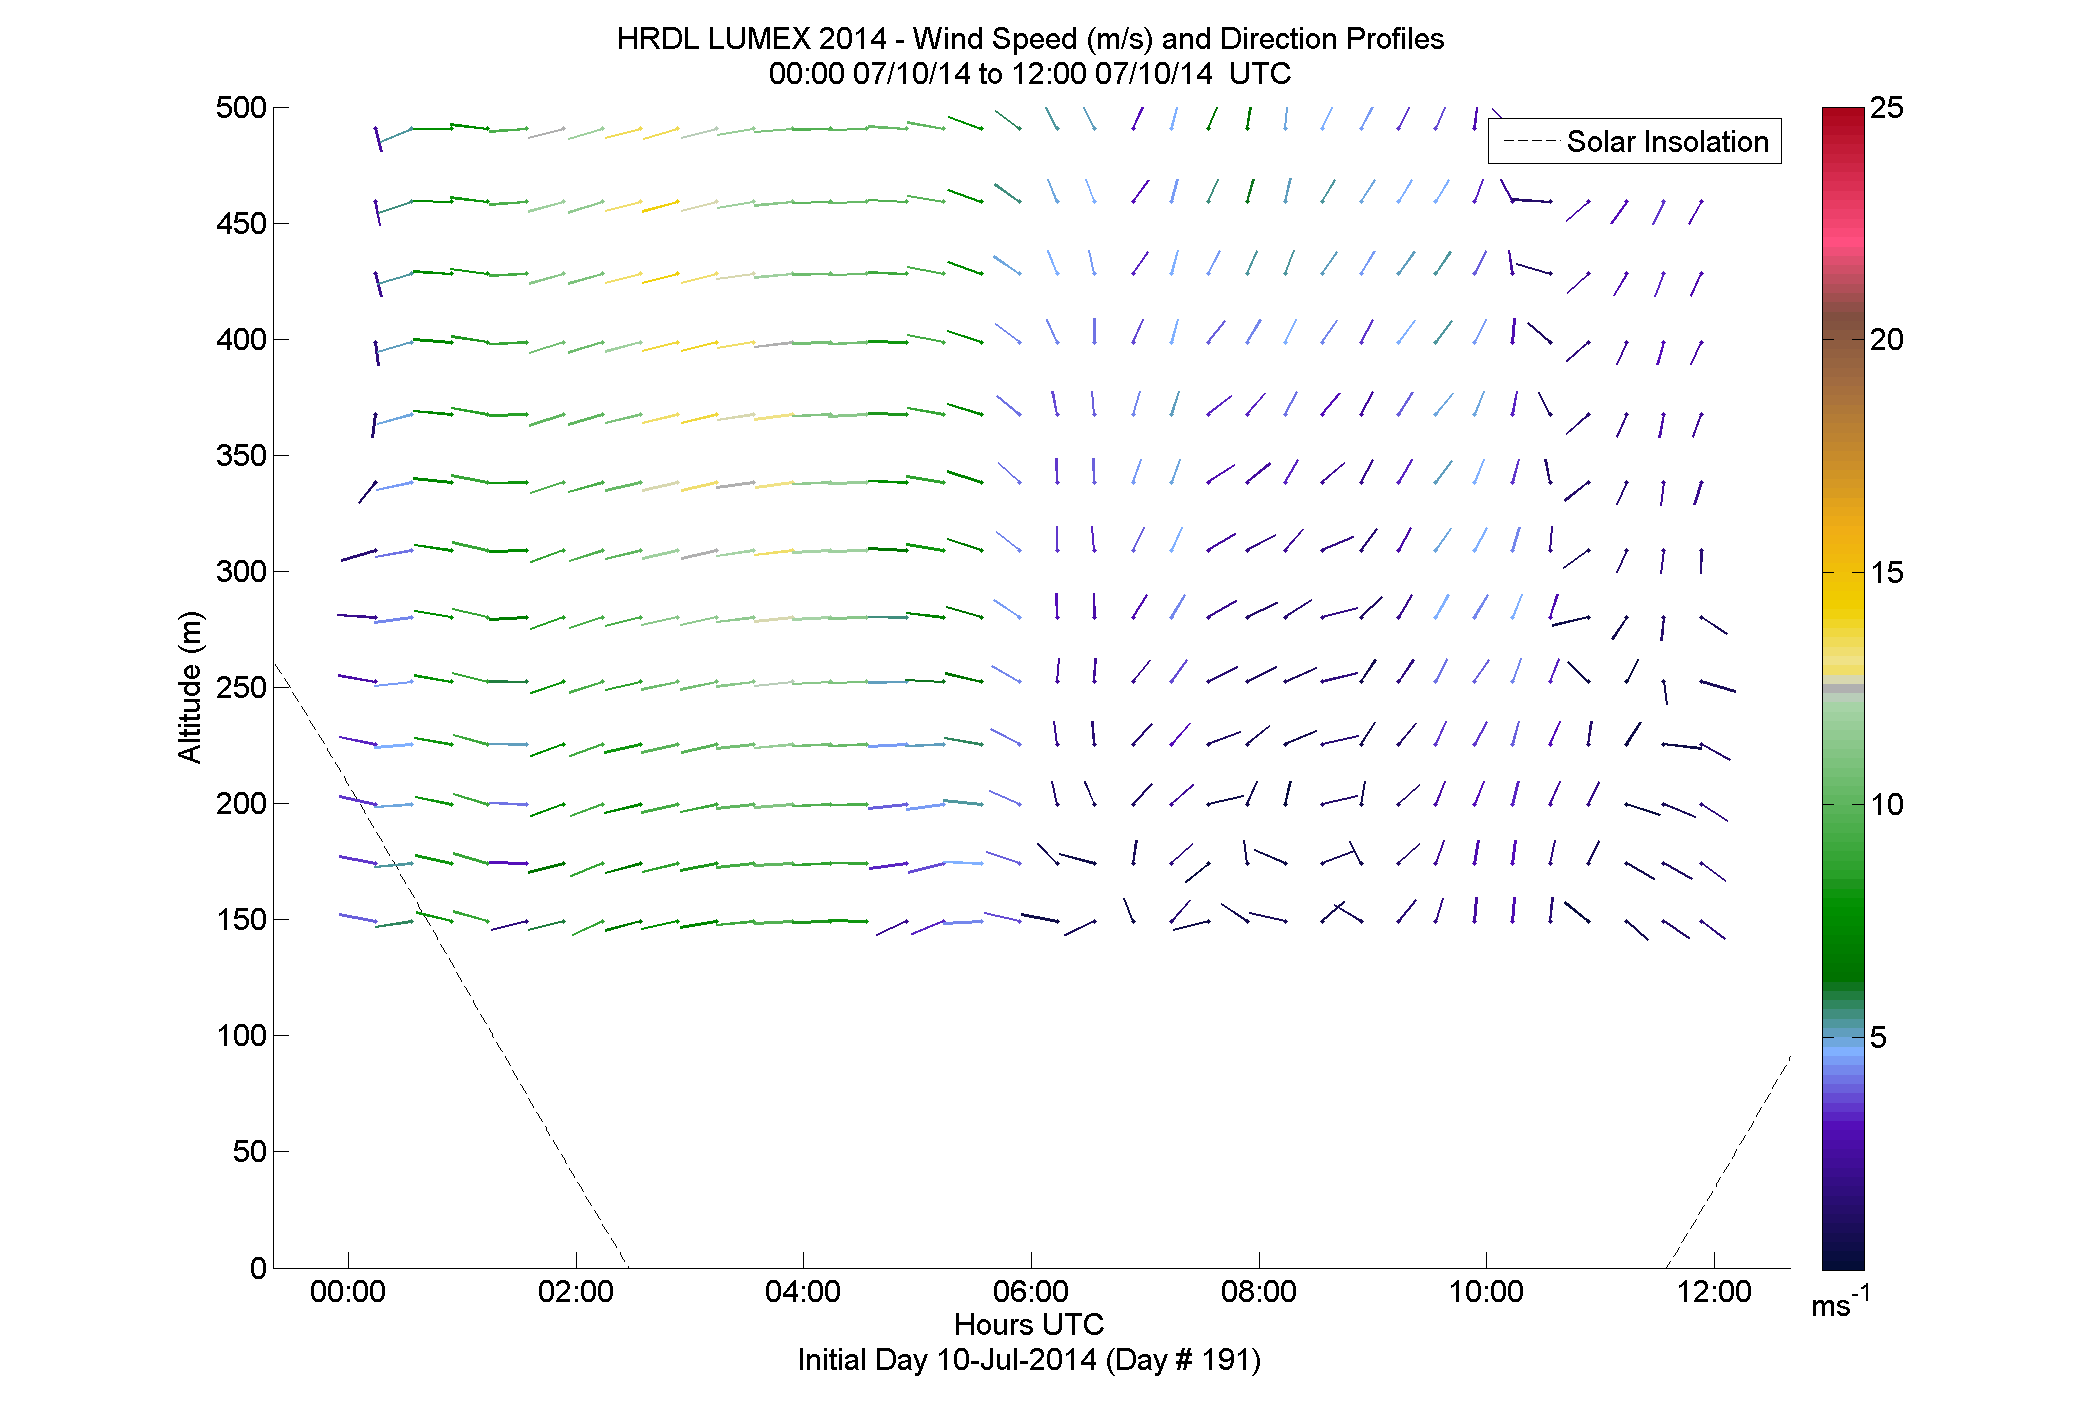 HRDL speed and direction profile - July 10 am